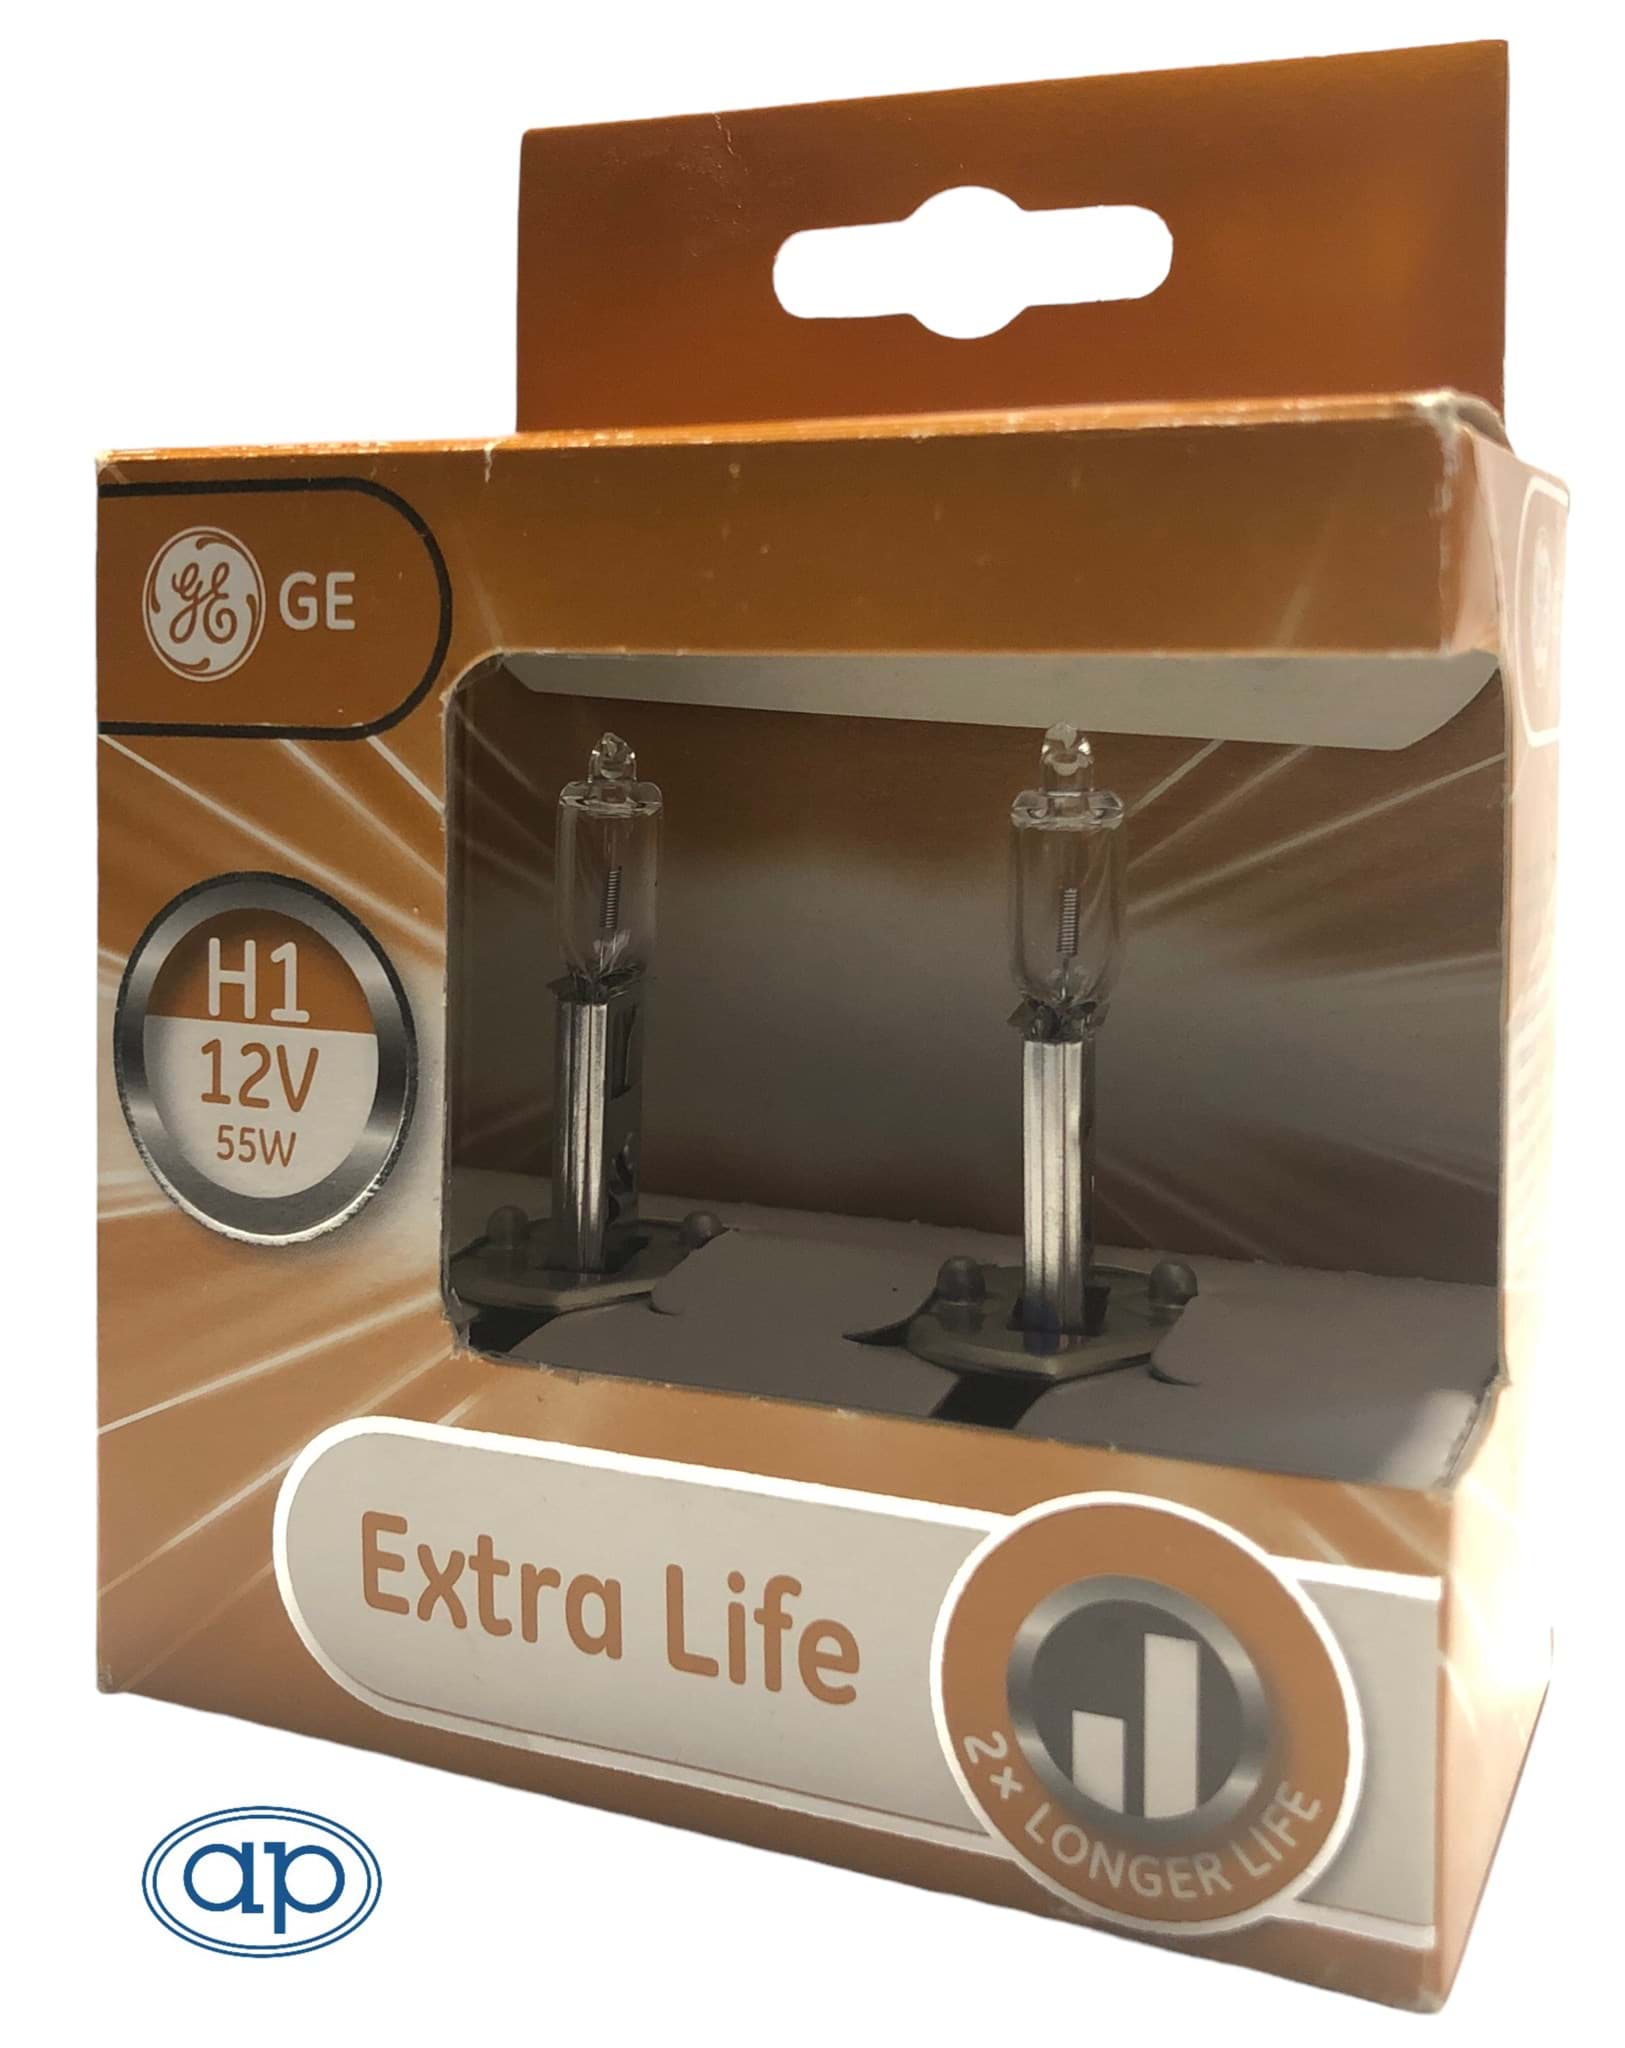 Picture of GE Extra Life H1 12V 55W  HD LL  Lampe General Electric Halogenlampe Doppelpackung - 2er Set | Abverkauf